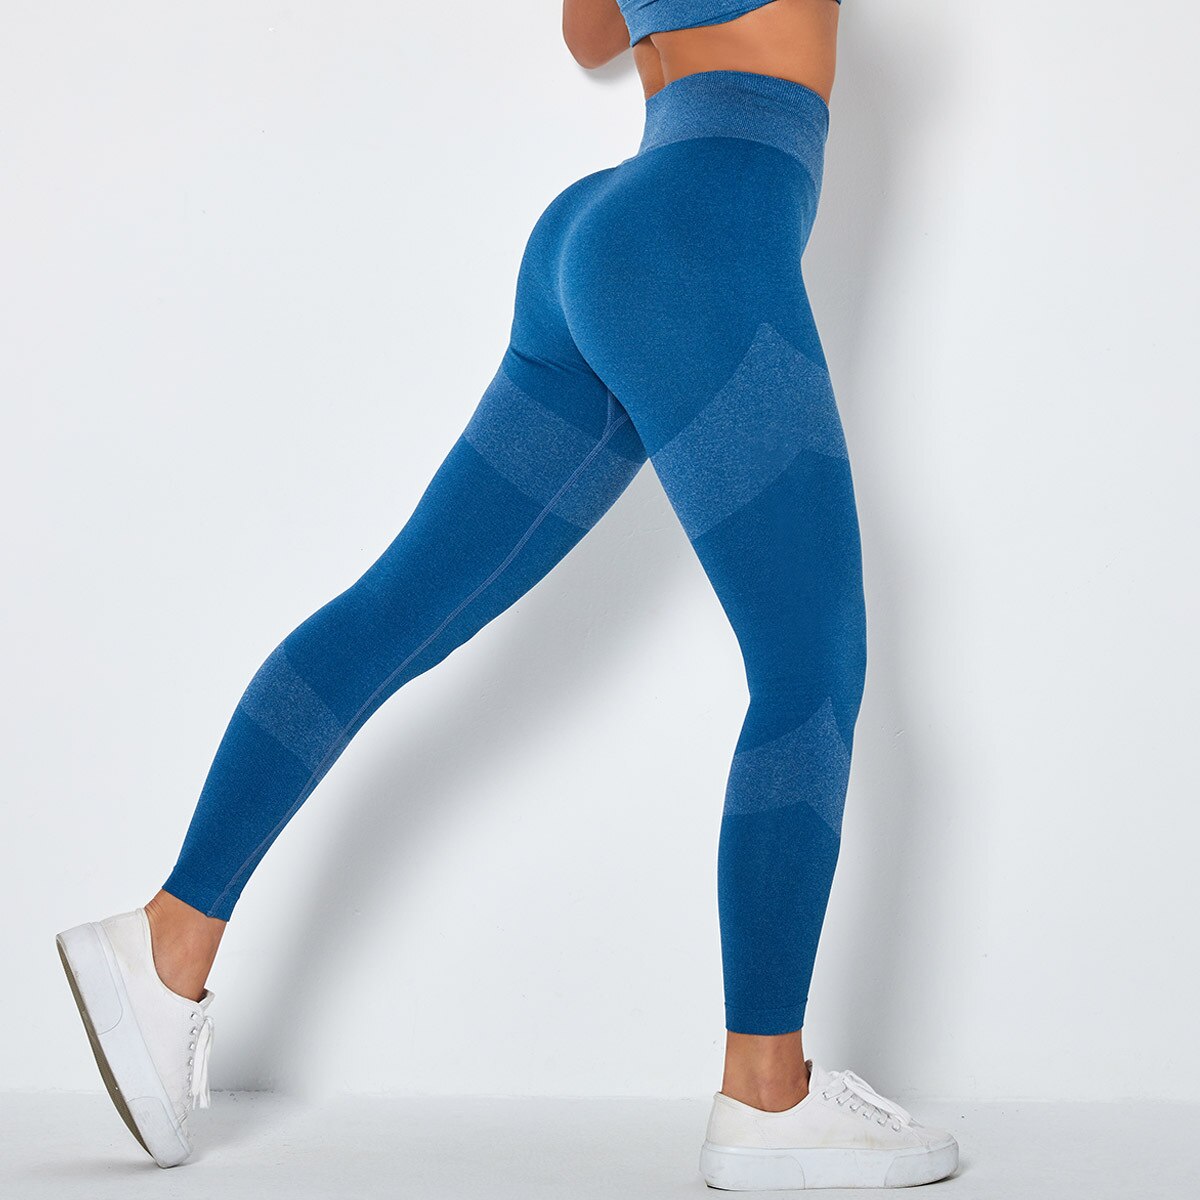 High Waist Seamless Leggings for Women Workout Gym Legging Push Up Super Stretchy Fitness Leggings Jogging Trousers